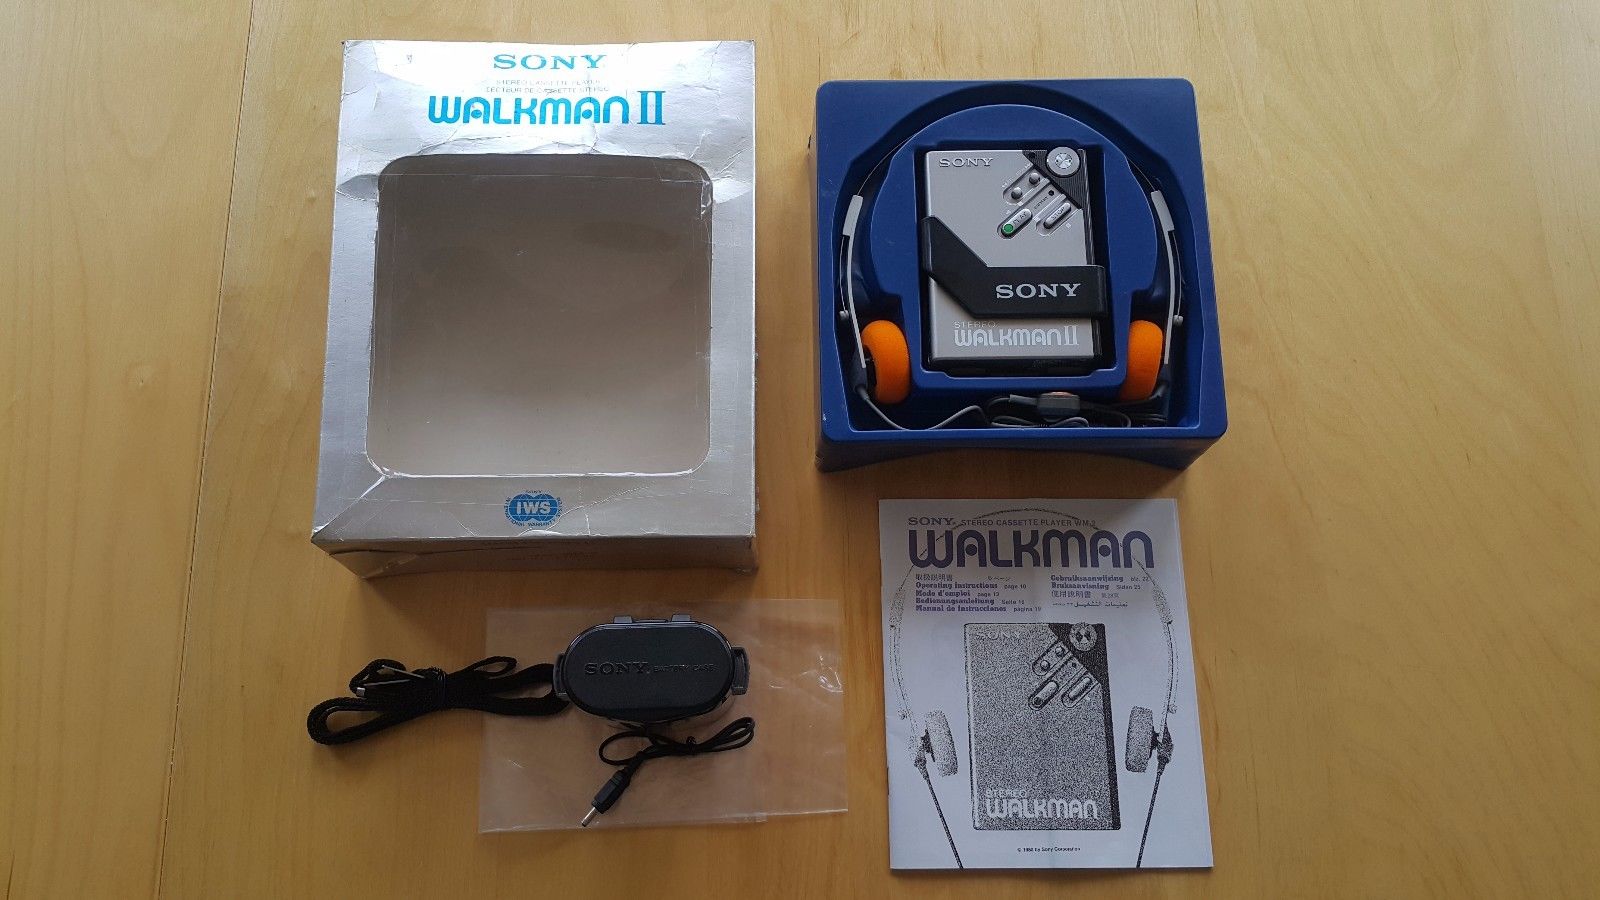 Sony Walkman WM-2 with original box for sale - 9.5 out of 10 